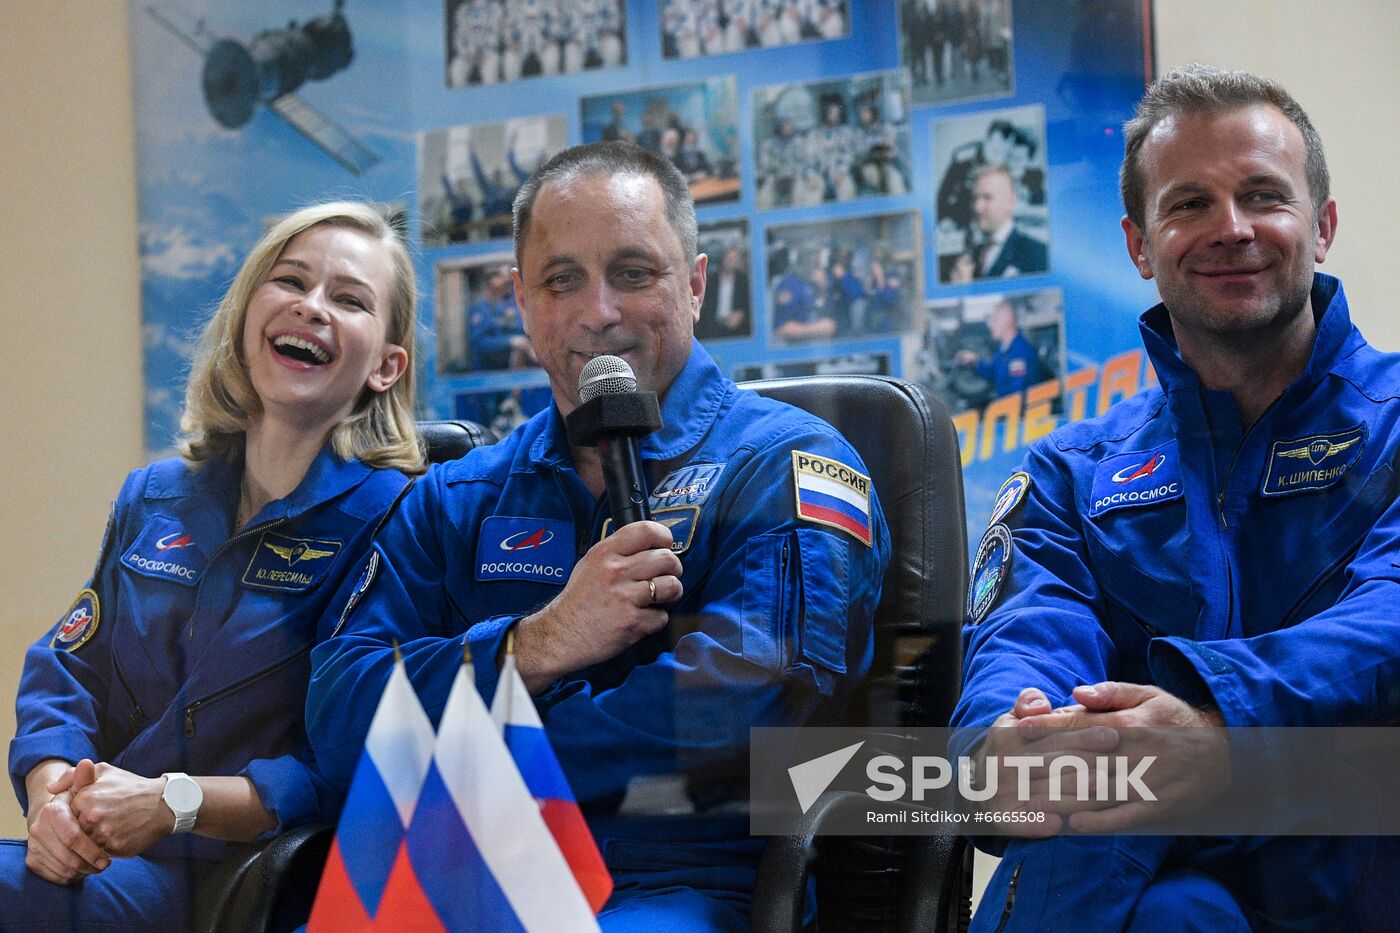 Kazakhstan Russia Space News Conference